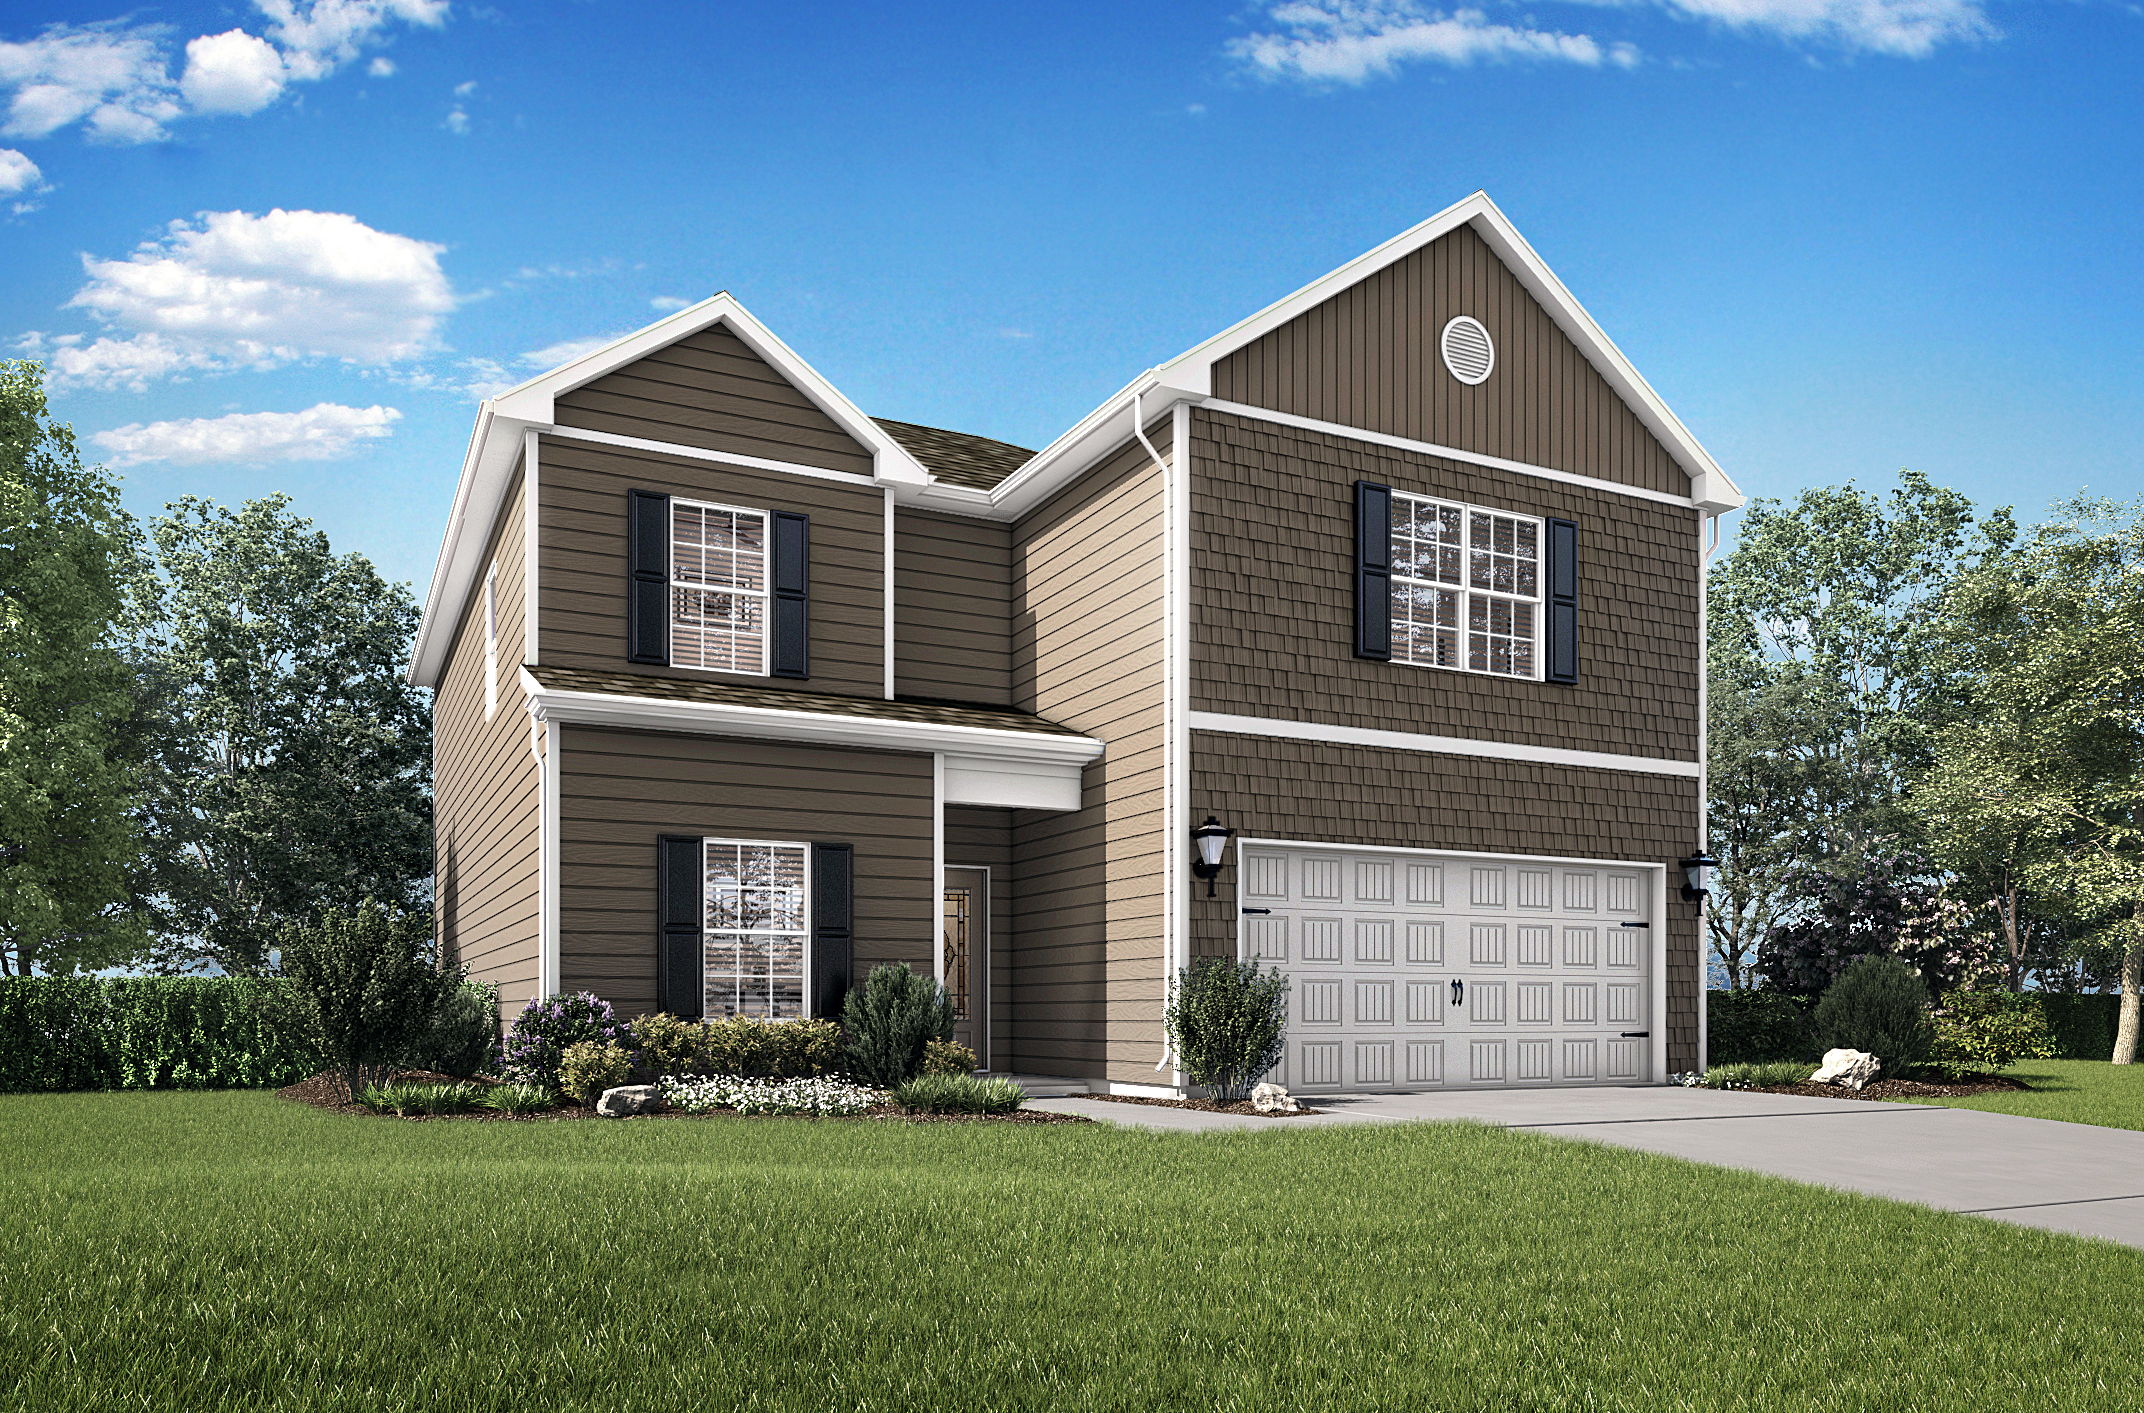 The Potomac by LGI Homes will be available at the Brookwood Grand Opening on Dec. 7, 2019.